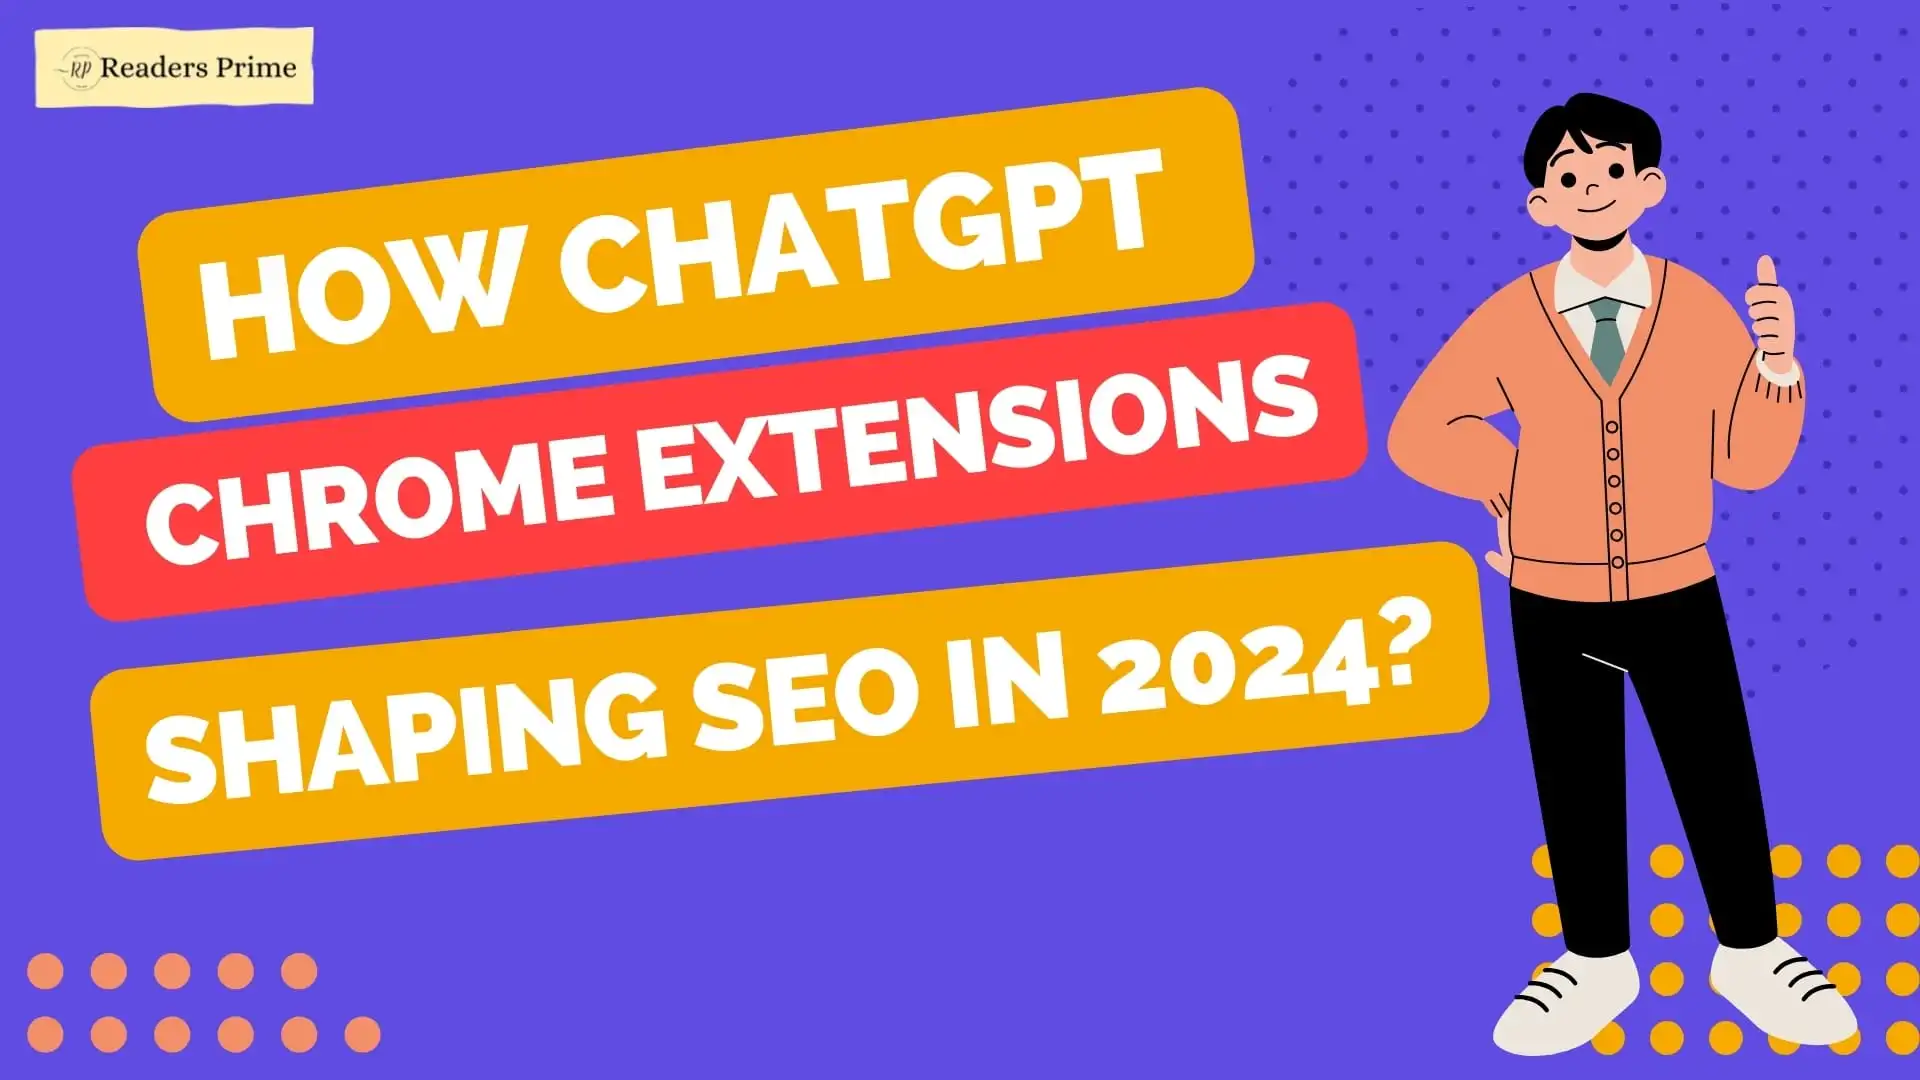 chatgpt chrome extensions for SEO